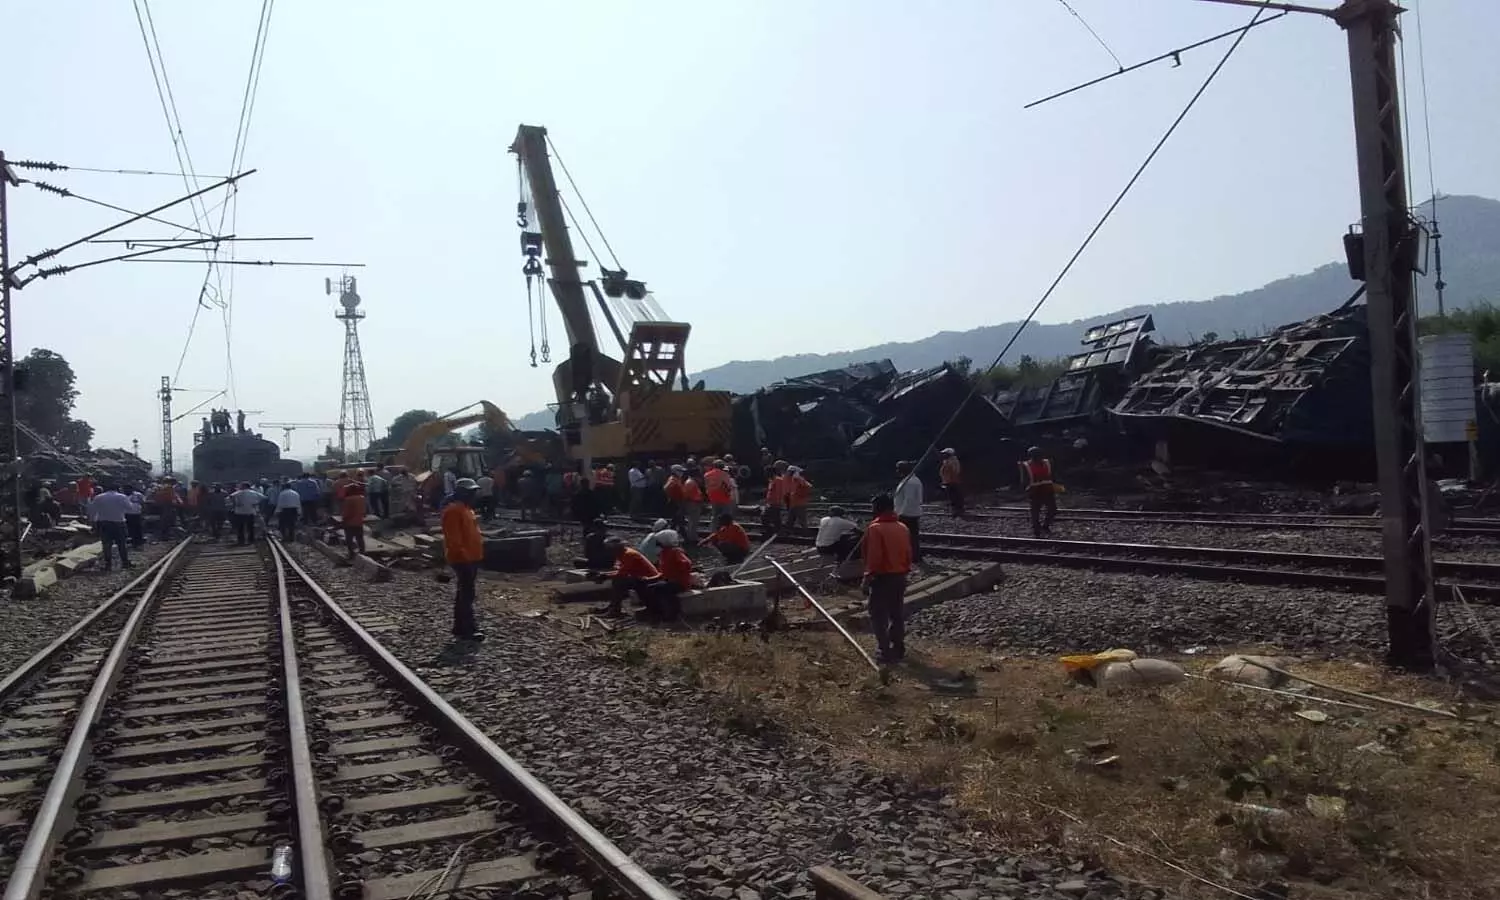 Gaya-Dhanbad rail section is still not clear, so far only 35 damaged bogies could be removed